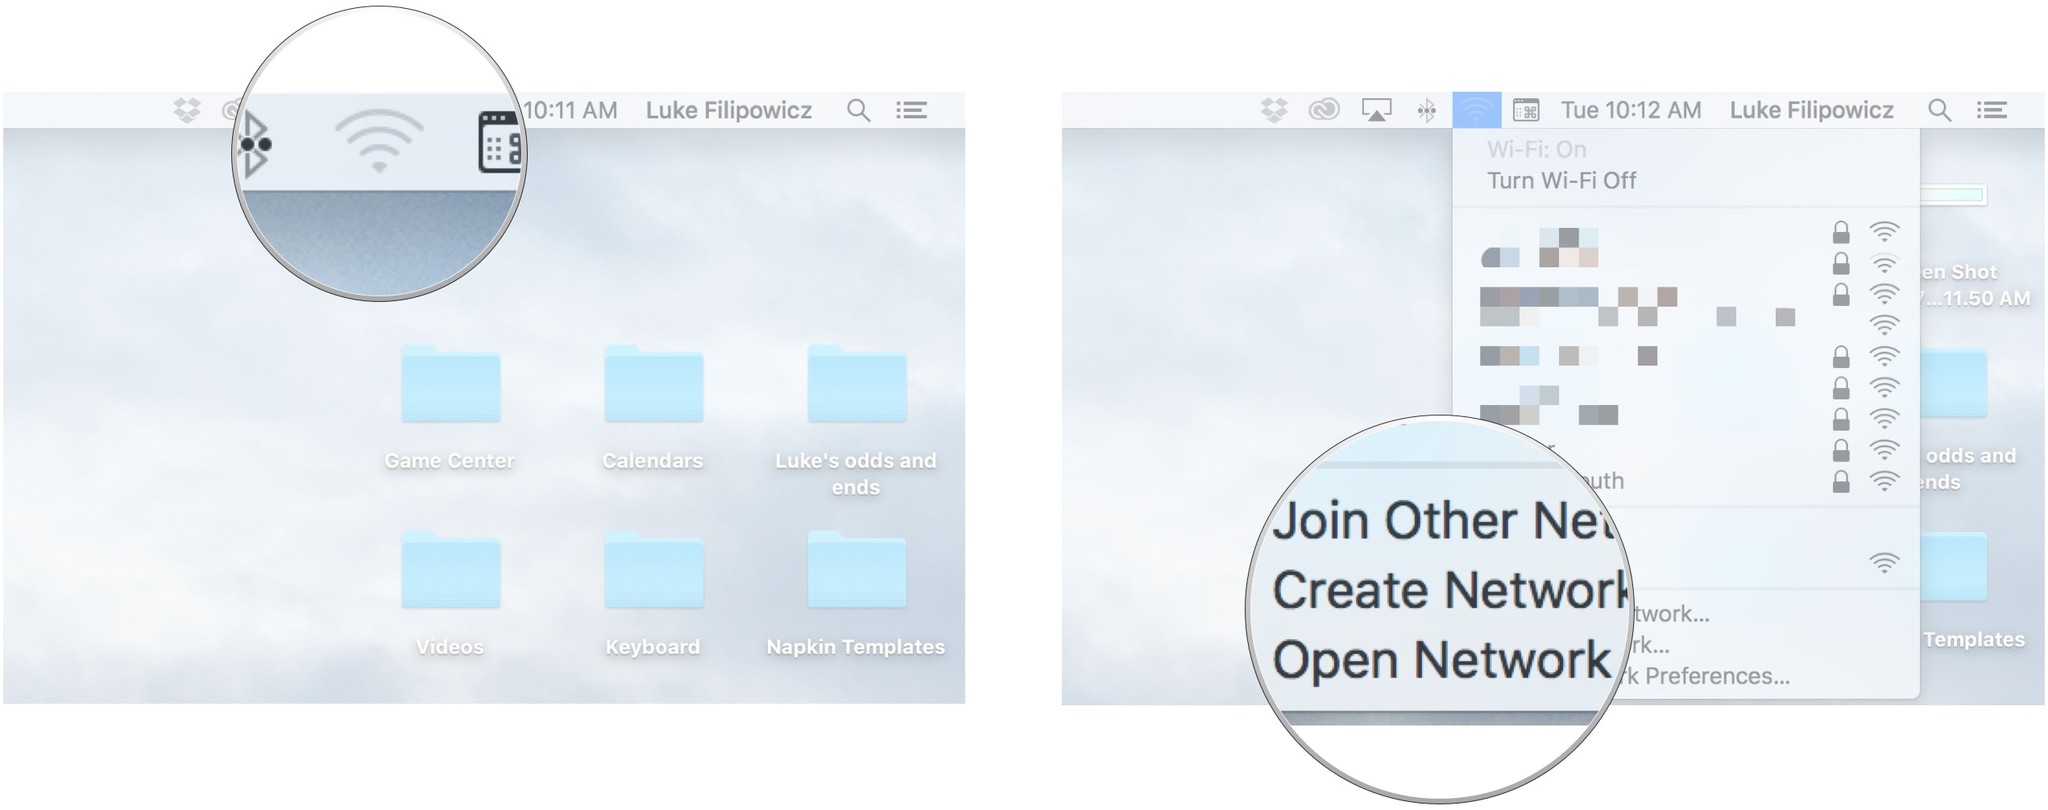 Click on the Wi-Fi icon in the menu bar and then click on Open Network Preferences.